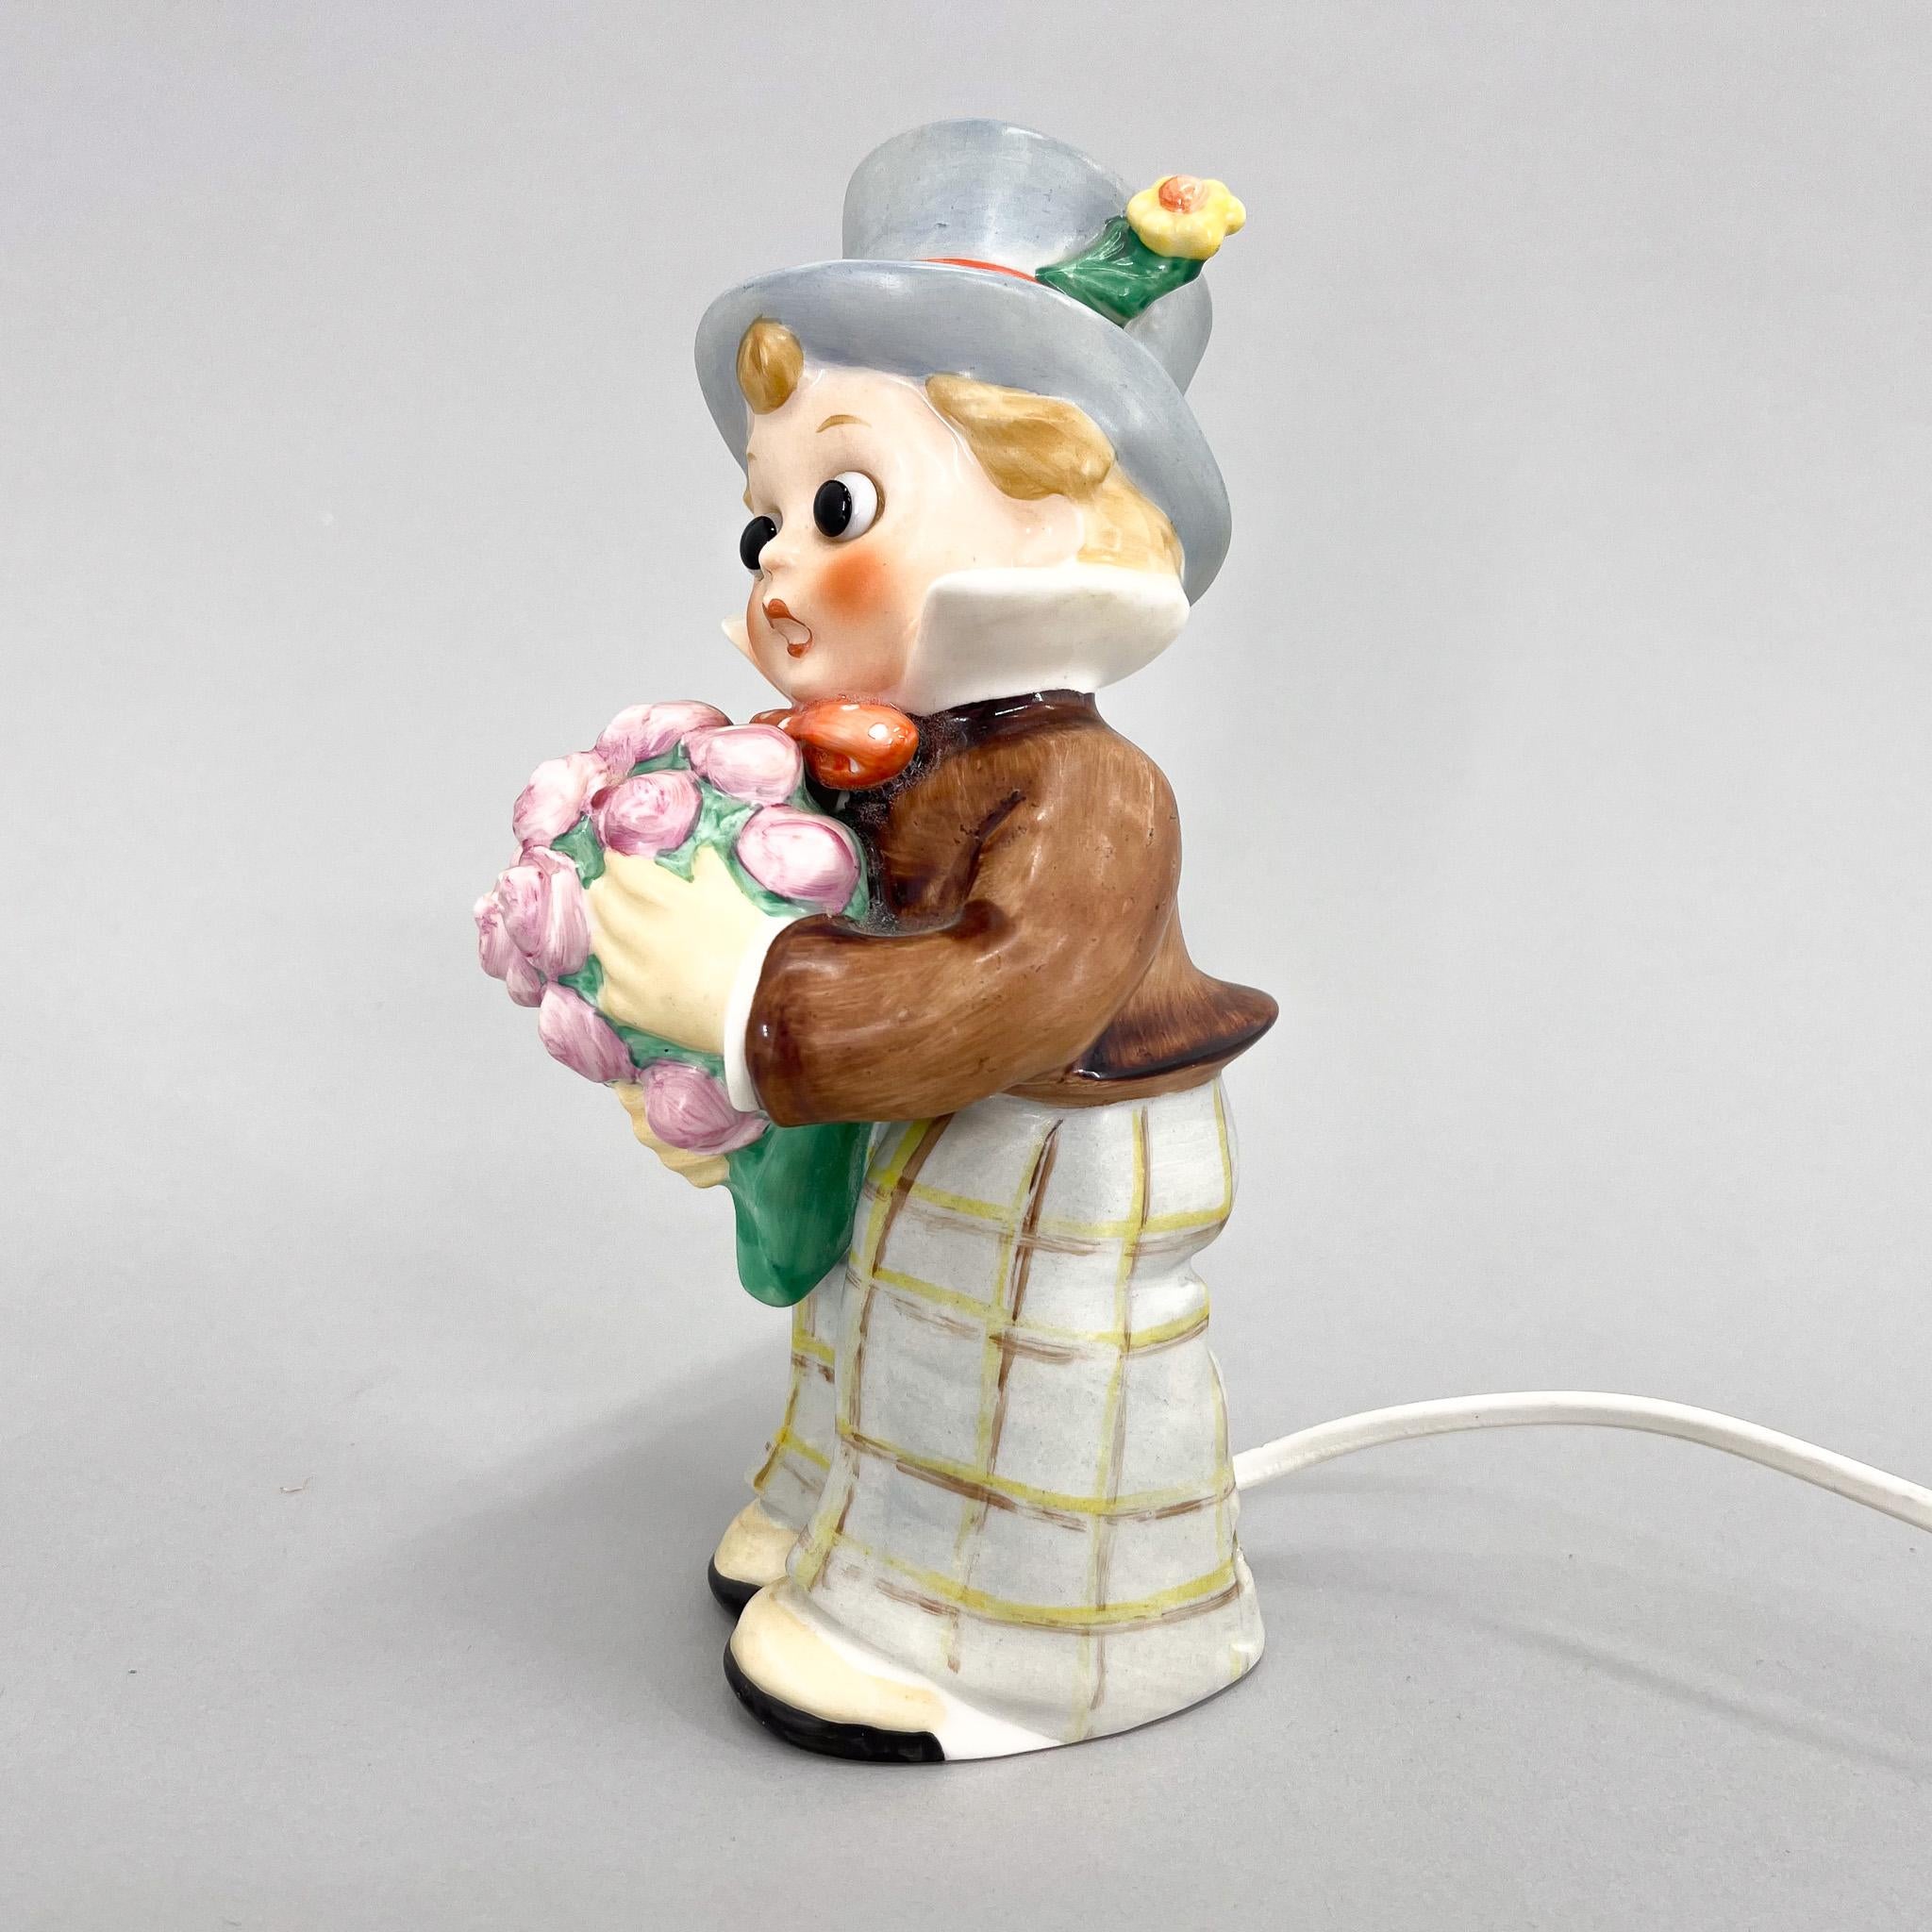 Porcelain figurine of a little boy with flowers as a lamp by Goebel (marked) made in the 1960s in Germany.